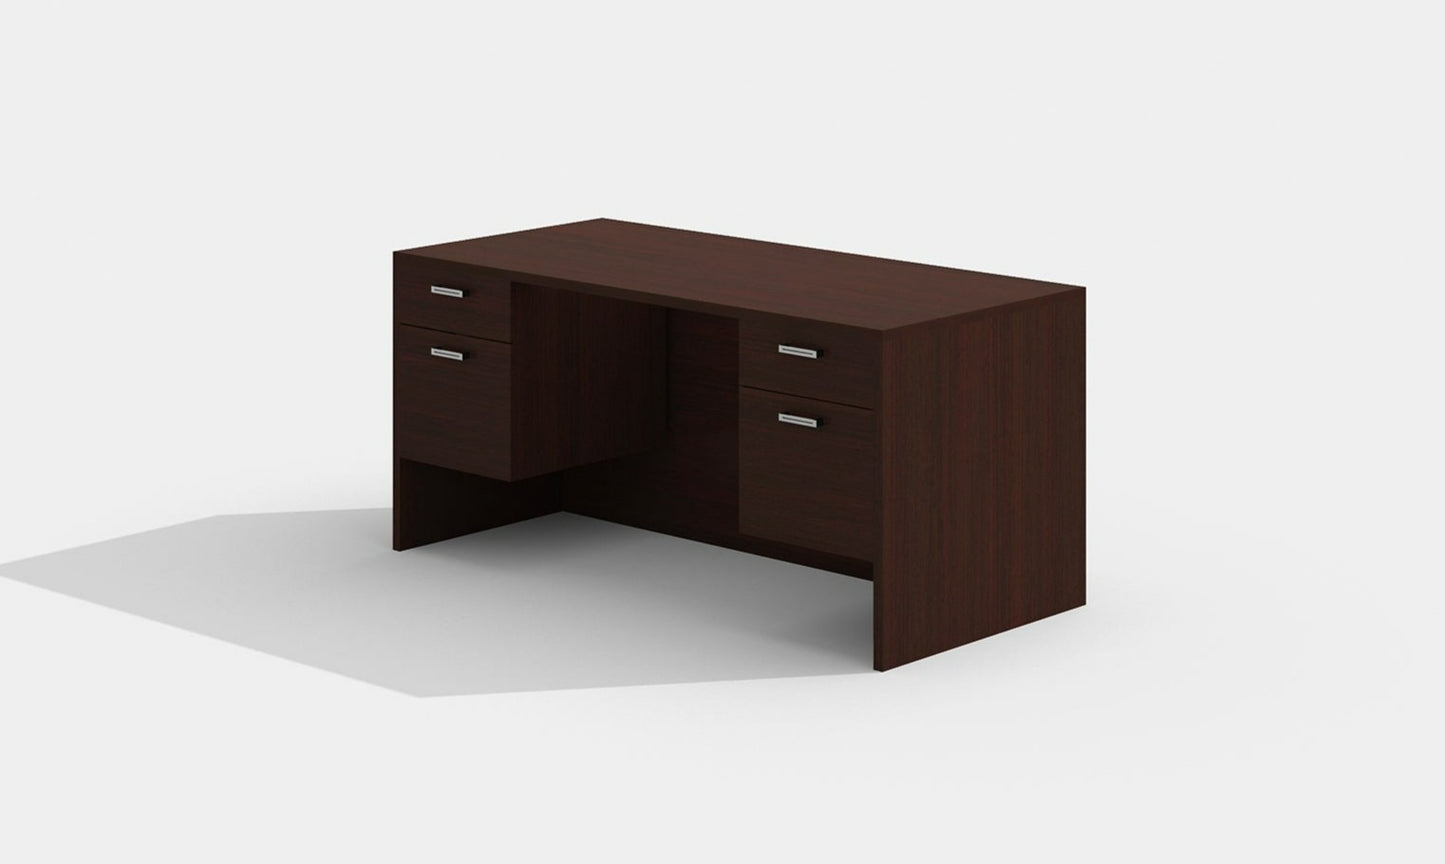 Amber Executive Office Desk w/ Double Suspended Storage by Cherryman Industries